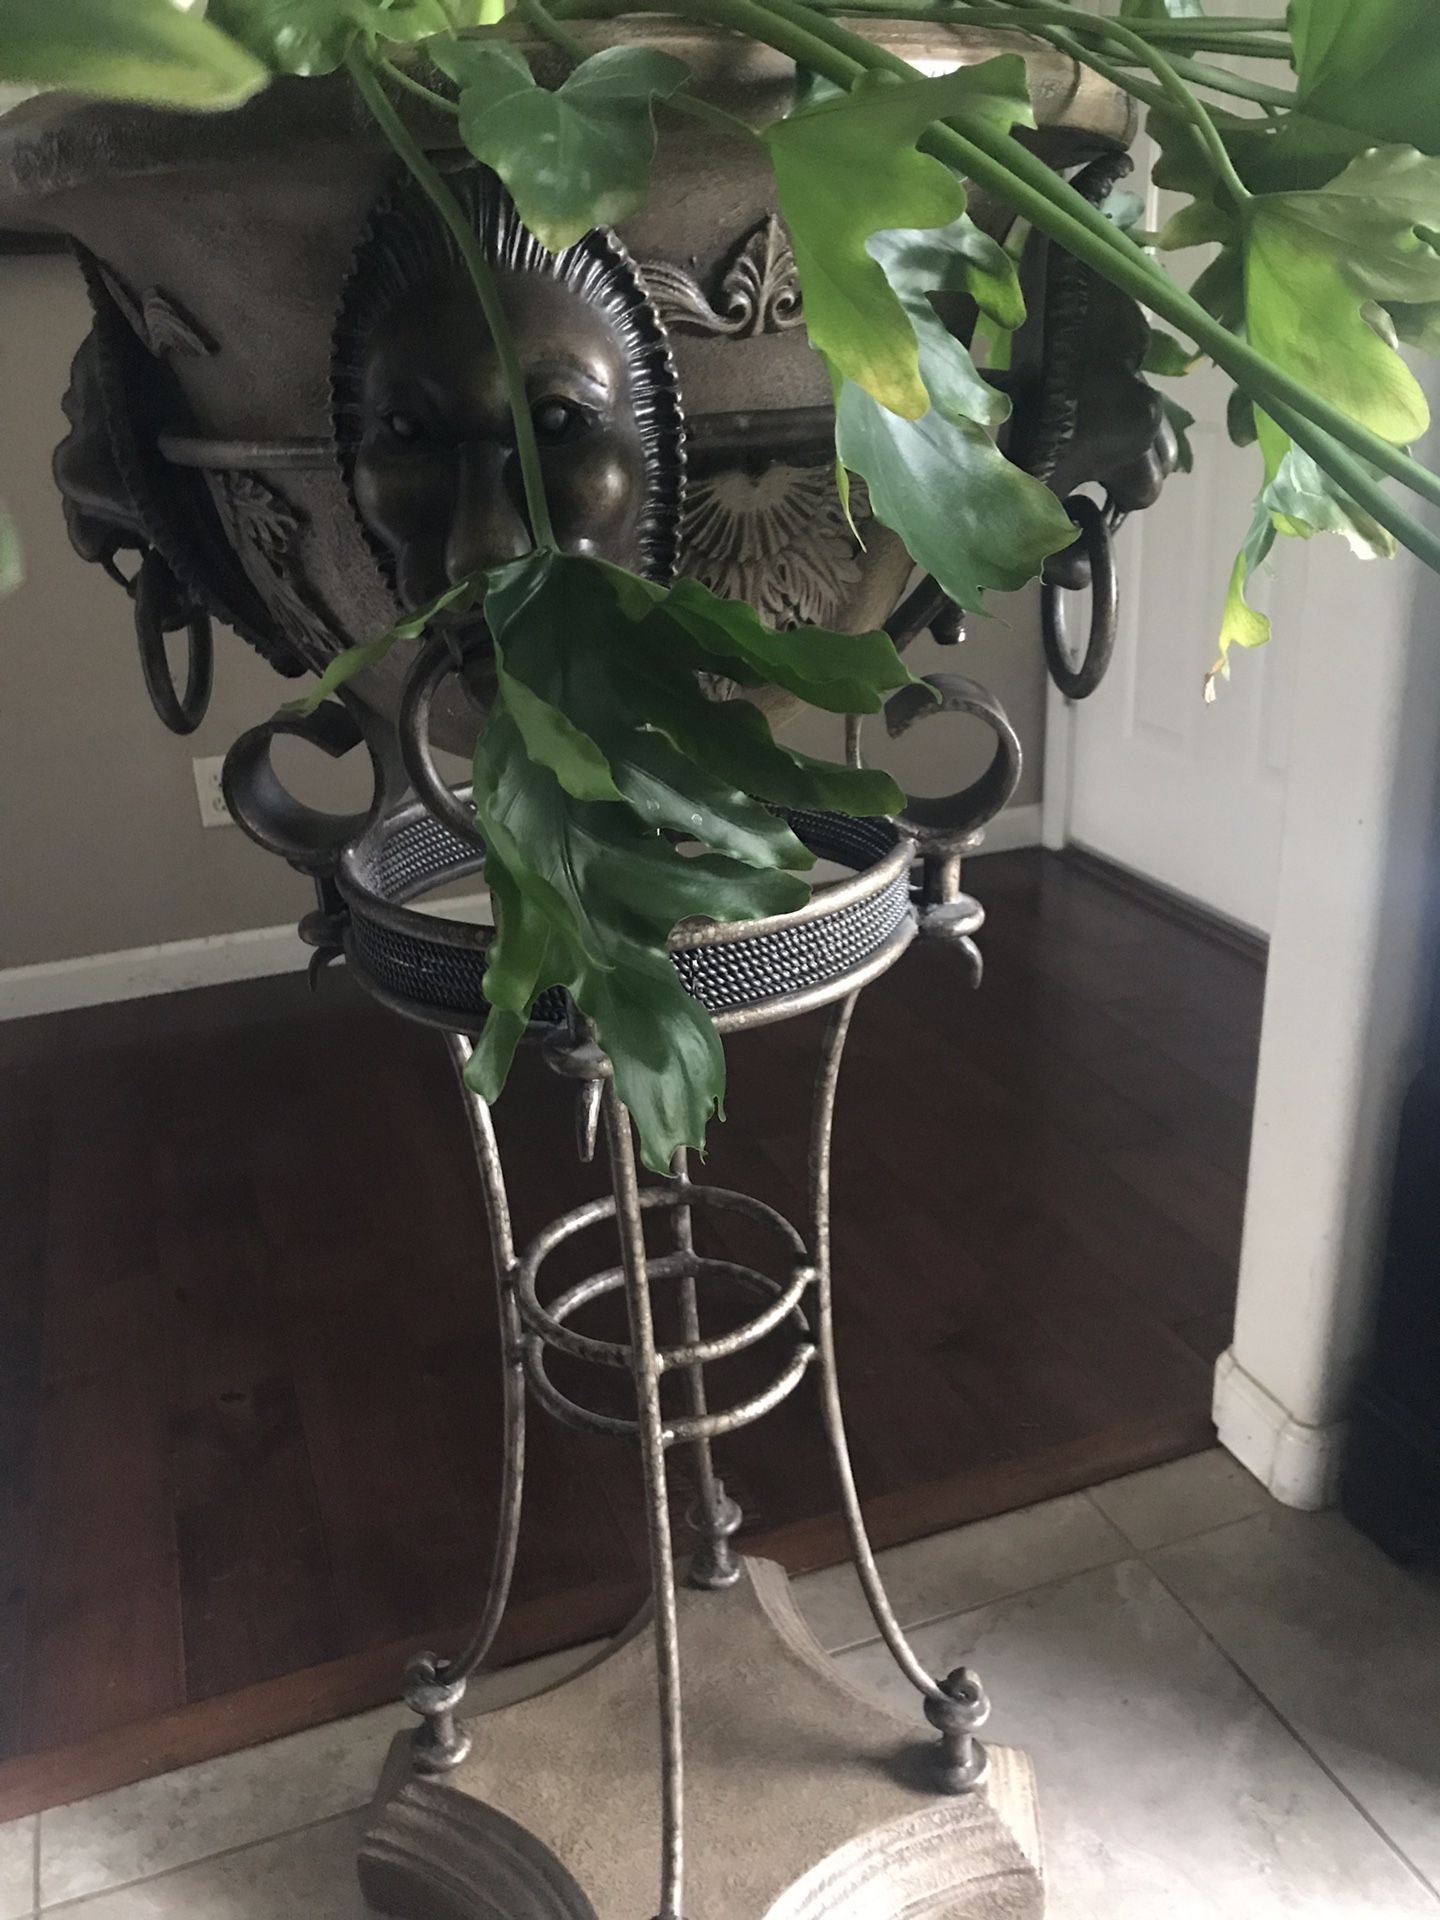 Ornate plant stand and pot . Plant is not for sale